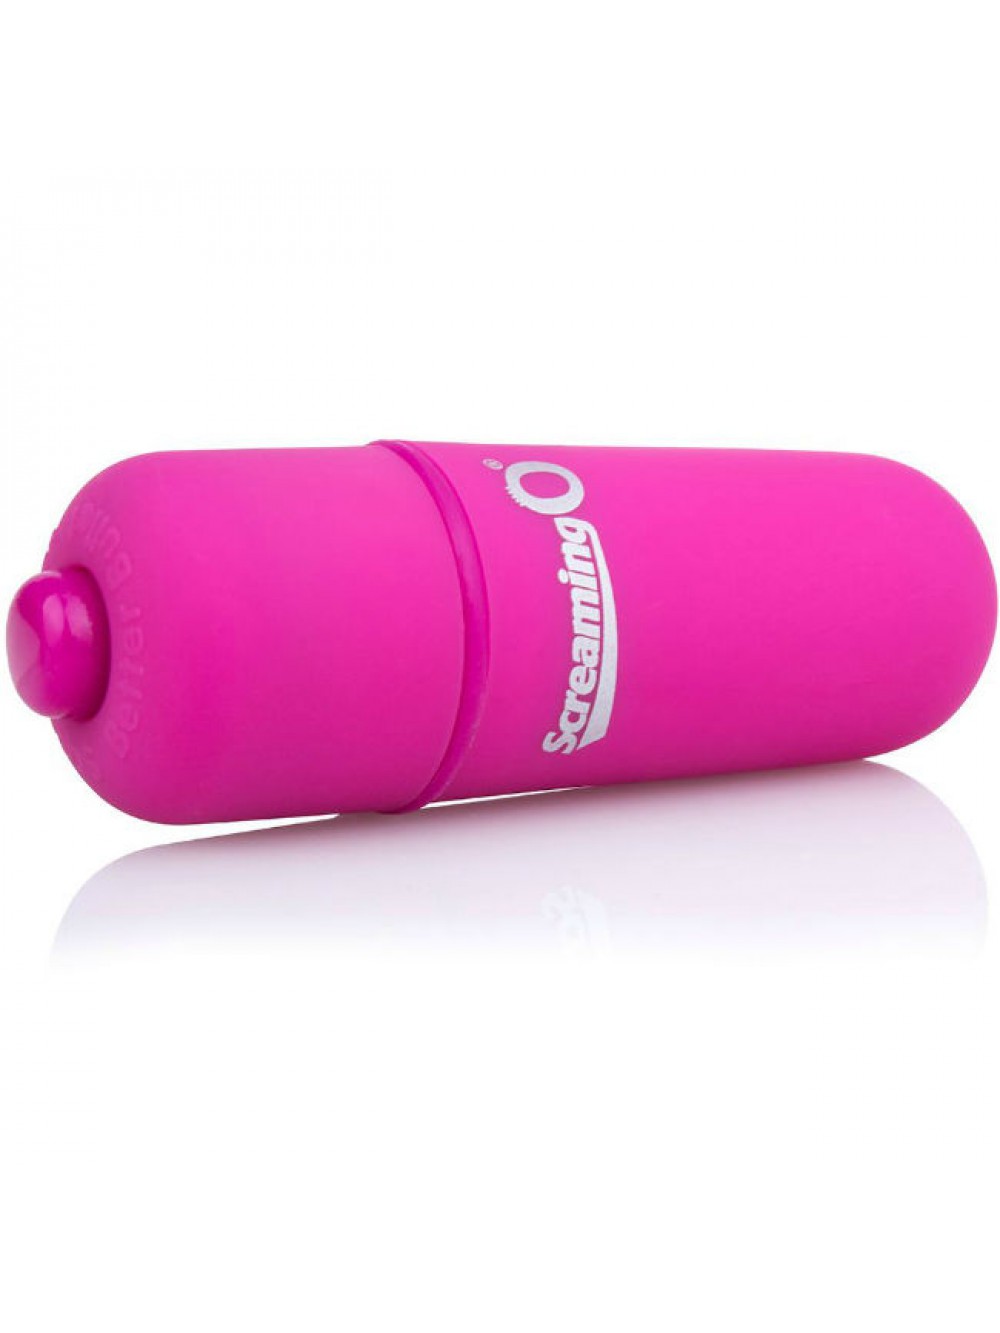 SCREAMING O SOFT TOUCH VOOOM BULLET PINK 817483012273